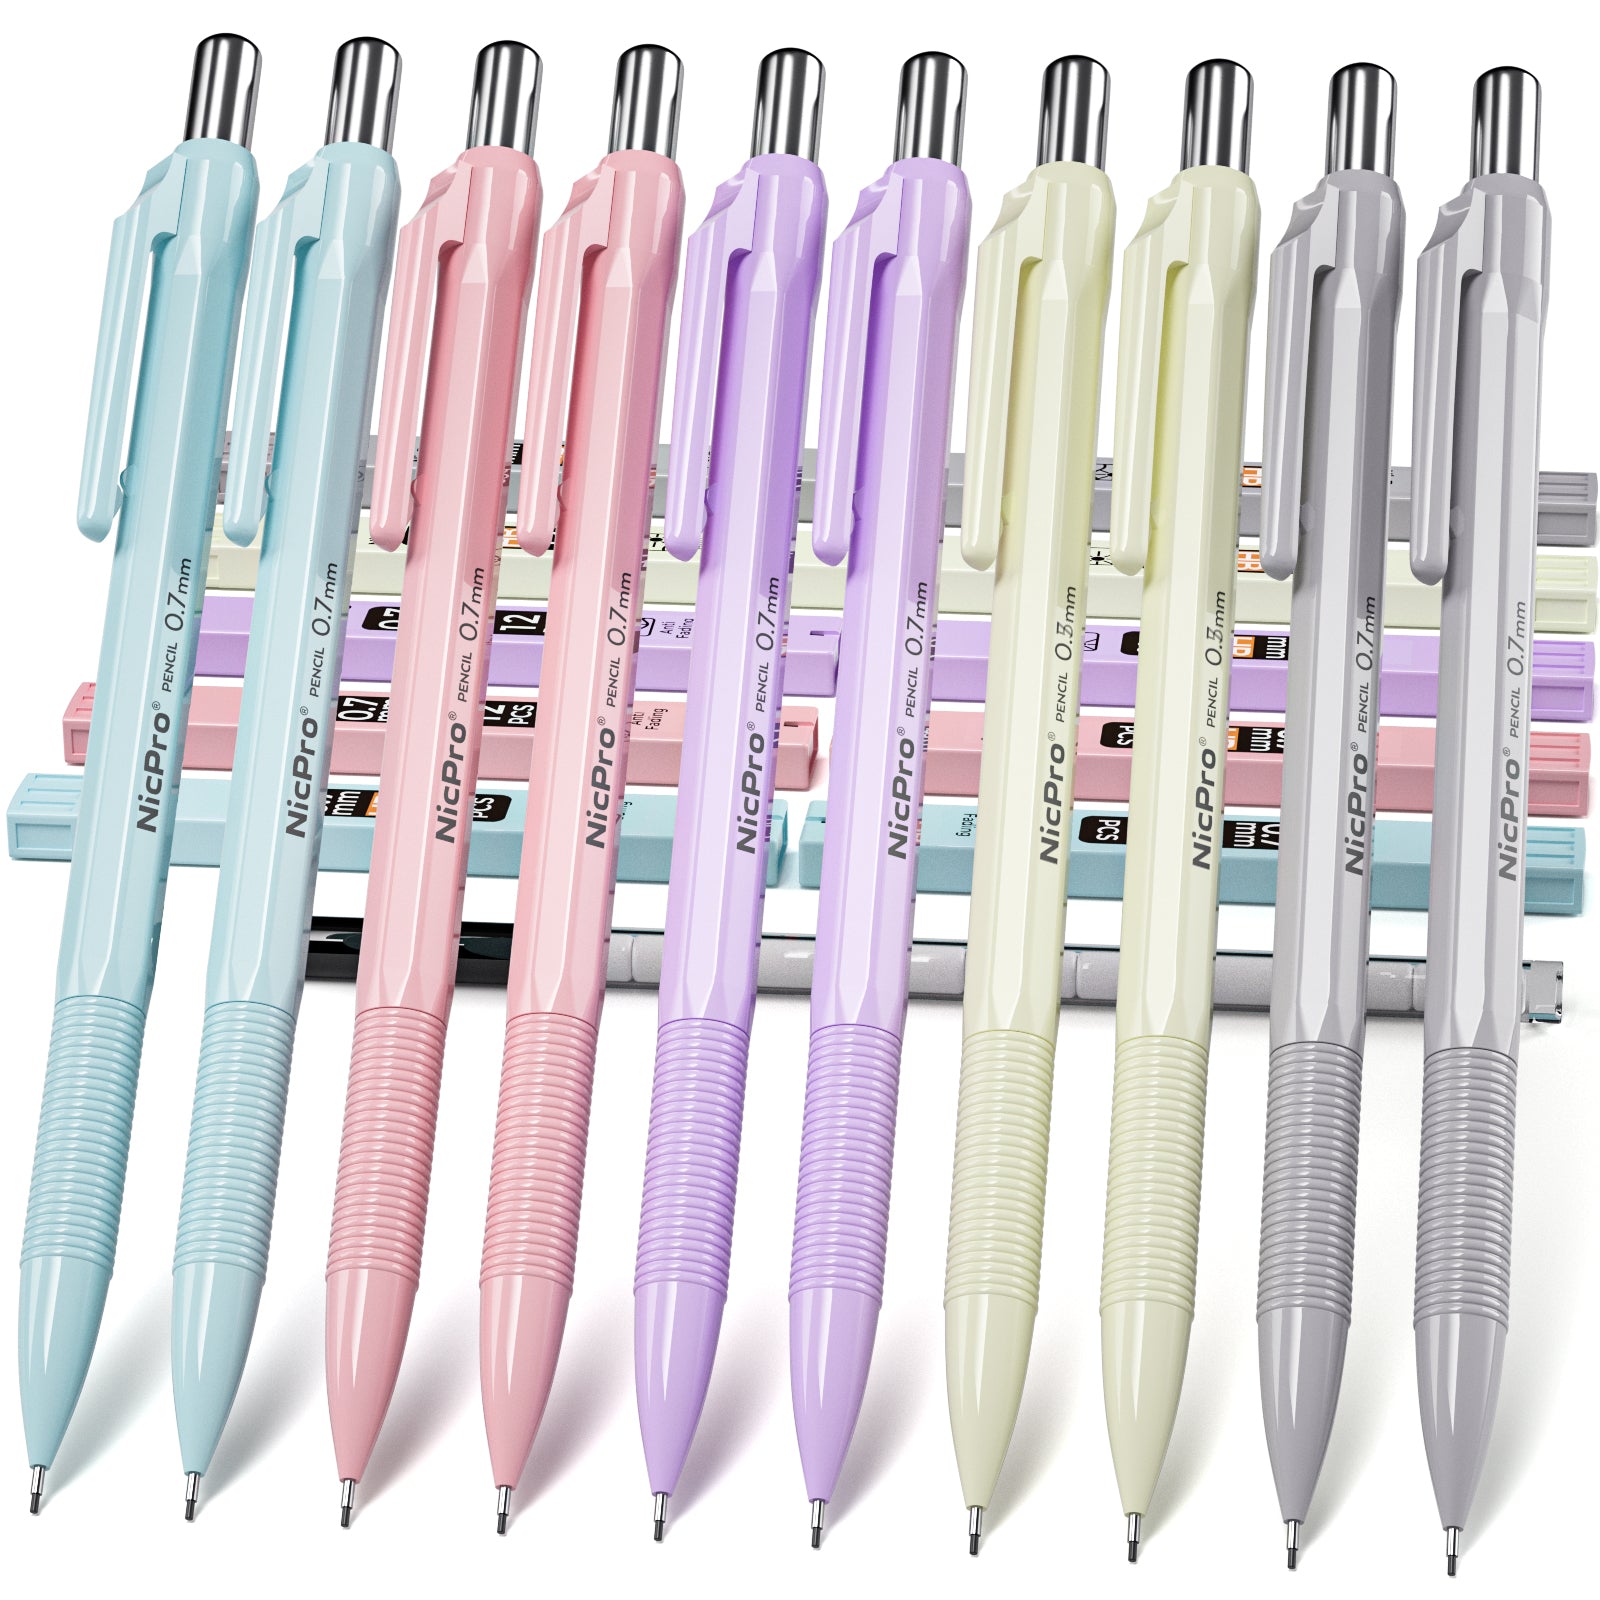 Nicpro 10 Pack 0.7 mm Mechanical Pencil Bulk Set with Case, Cute Candy